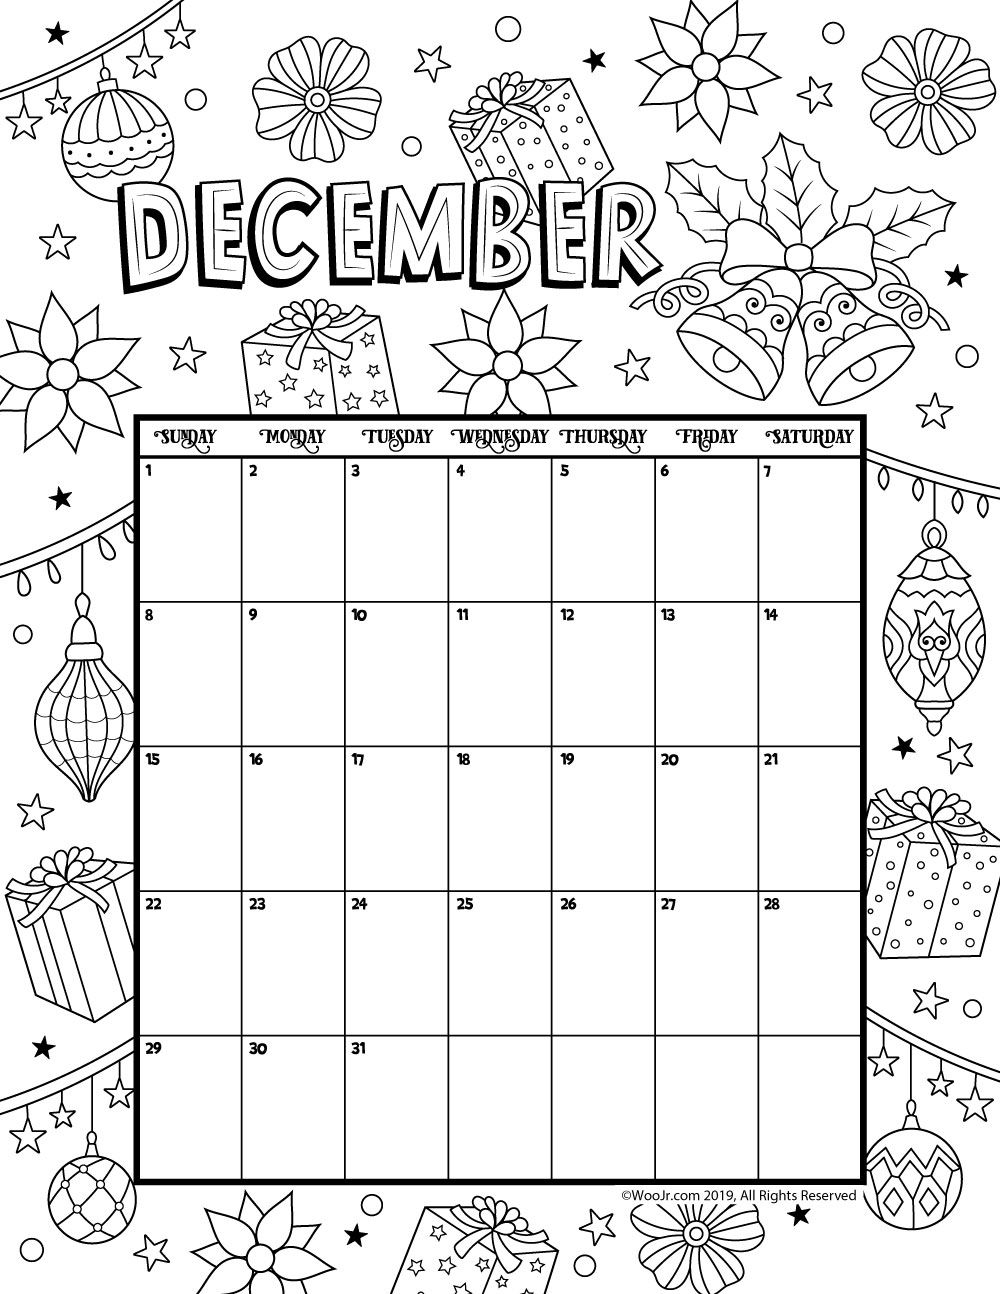 December Calendar 2021 Coloring Pages Calendar For 2021 Coloring